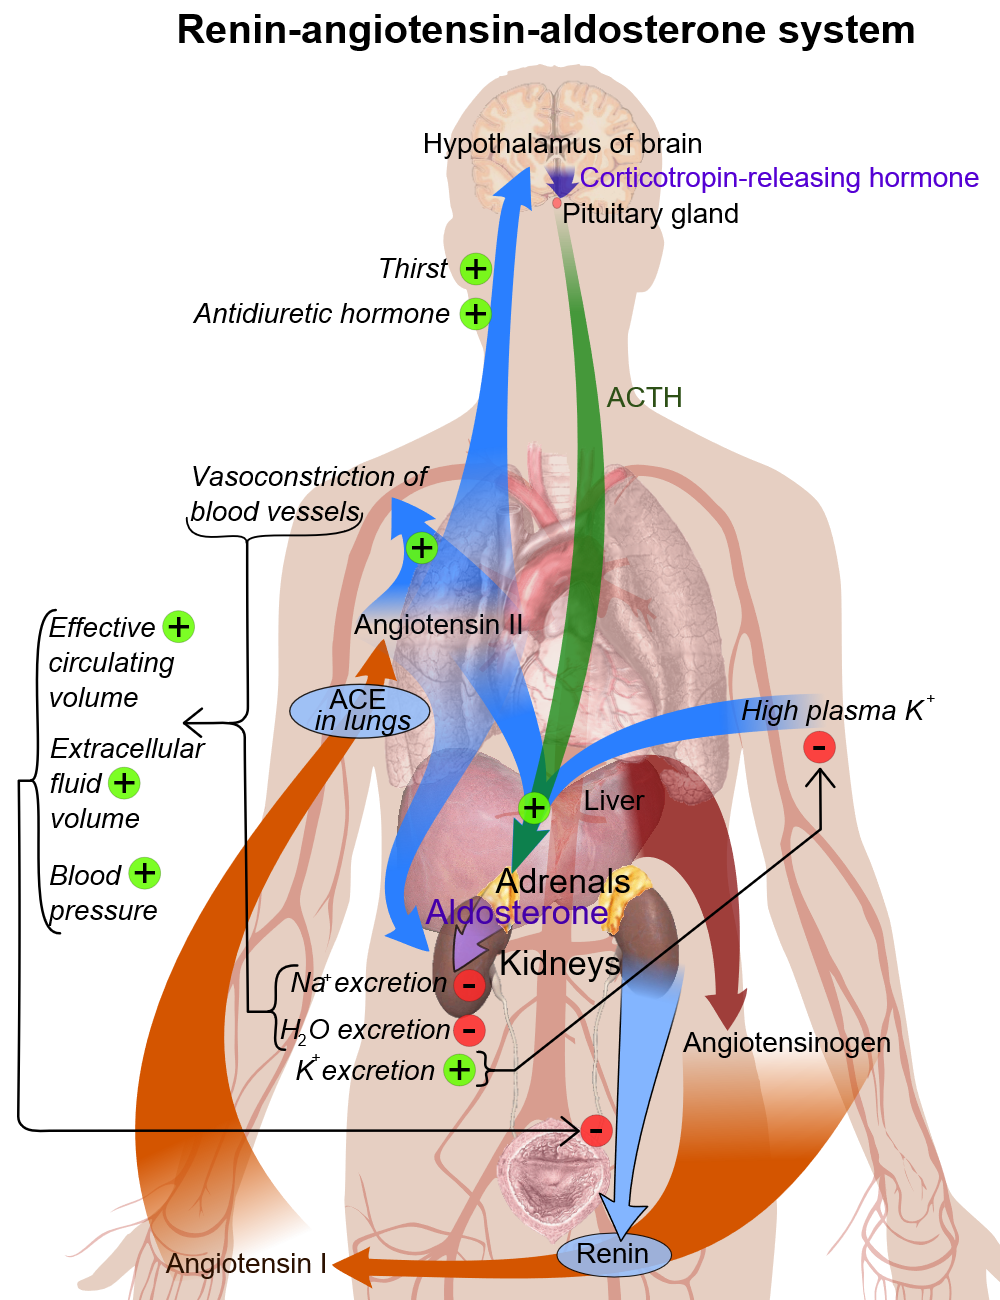 Renin angiotensin system, by Mikael Häggström - https://commons.wikimedia.org/w/index.php?curid=8458370